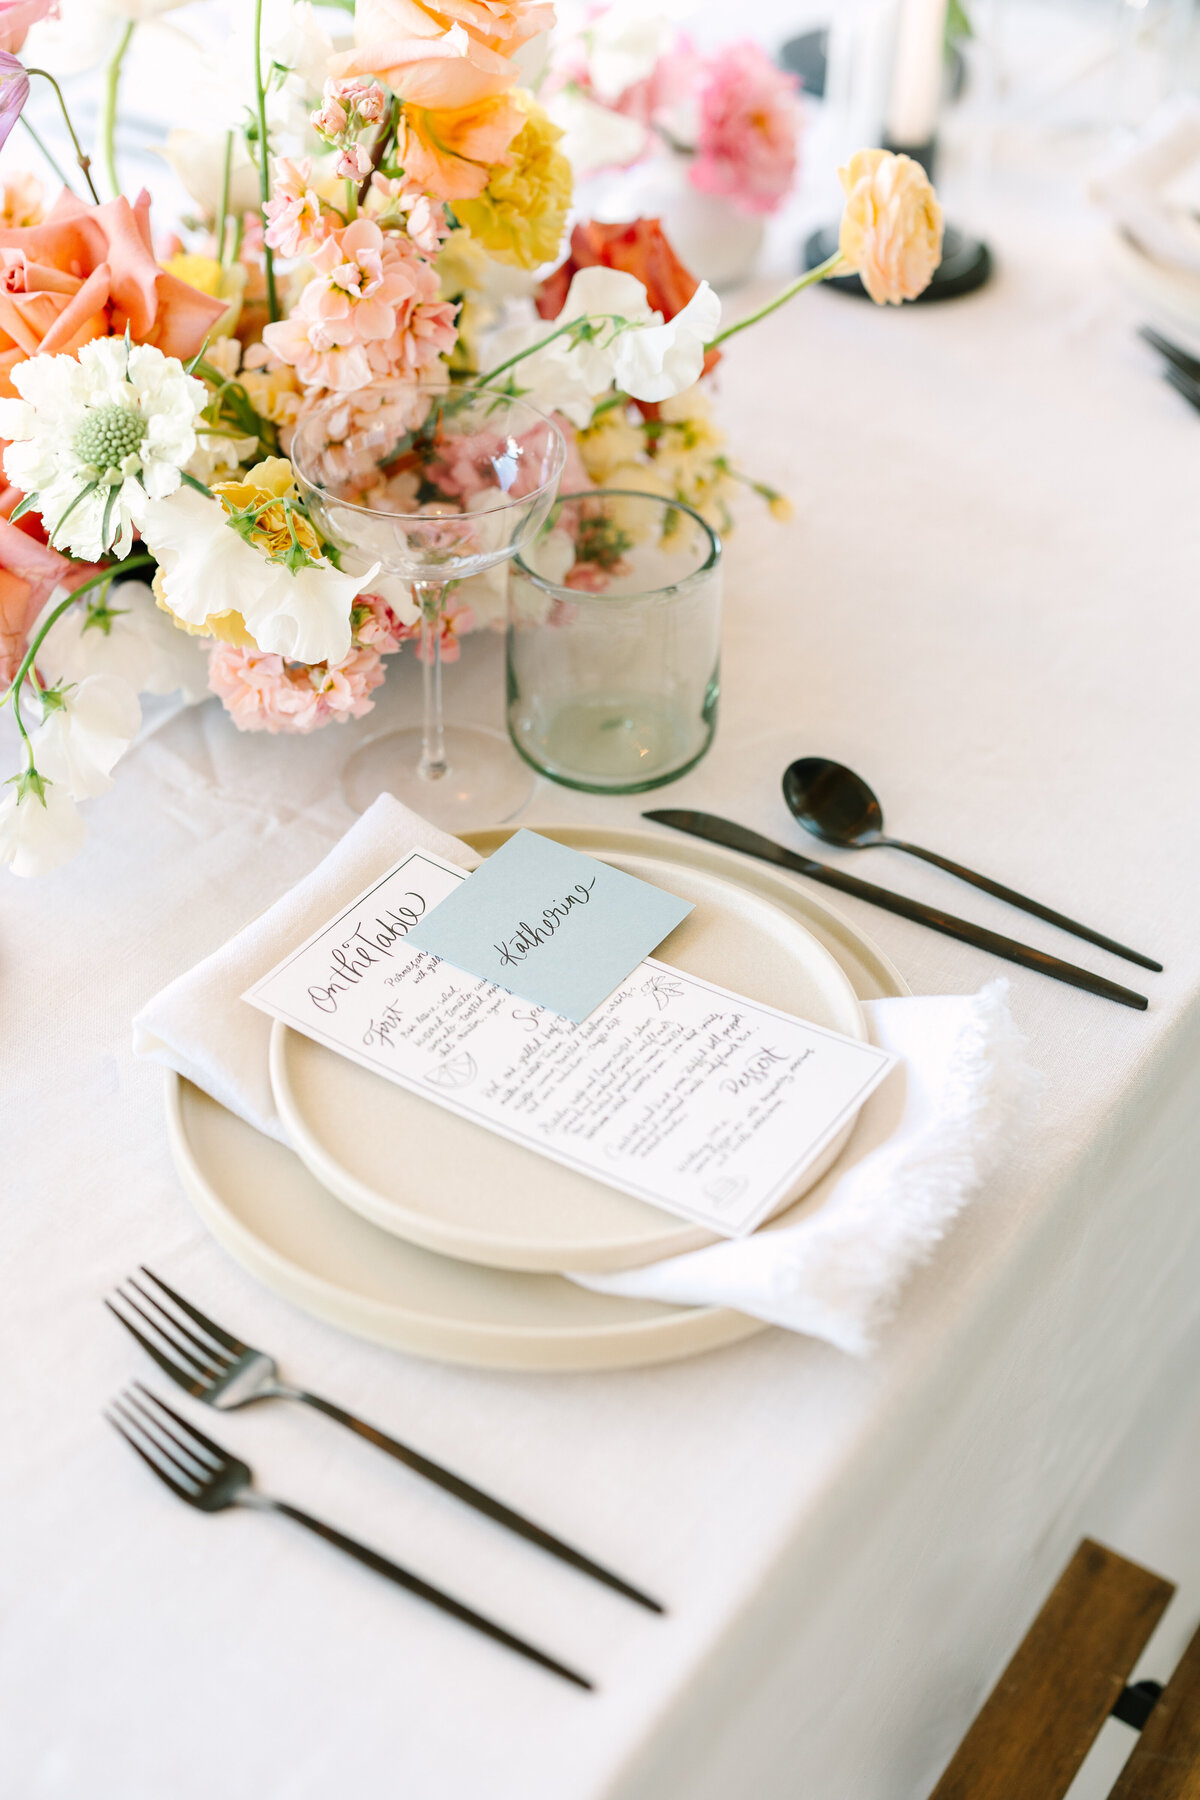 wedding tablescape with dinner menu, plates, silverware, and colorful florals.